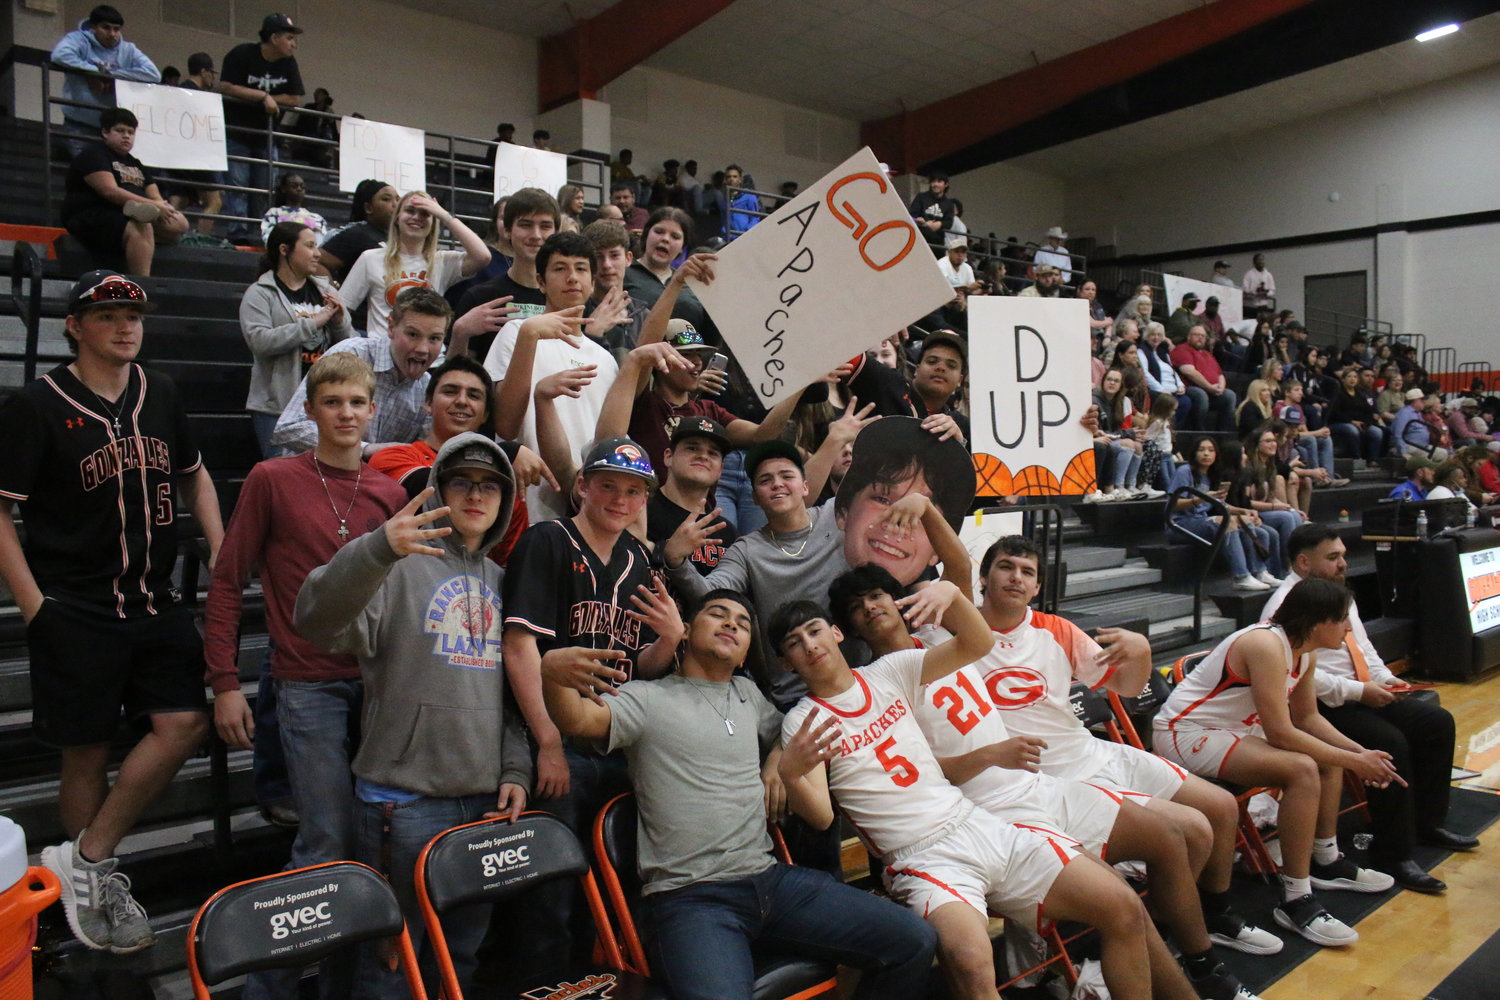 Gonzales High School students join the Apache bench in holding up signs and flashing hand signals just before the third period begins during the Tuesday, Feb. 8, game against Pleasanton. Unfortunately, their spirited hijinks could not prevent the Eagles from winning the game, 62-44.